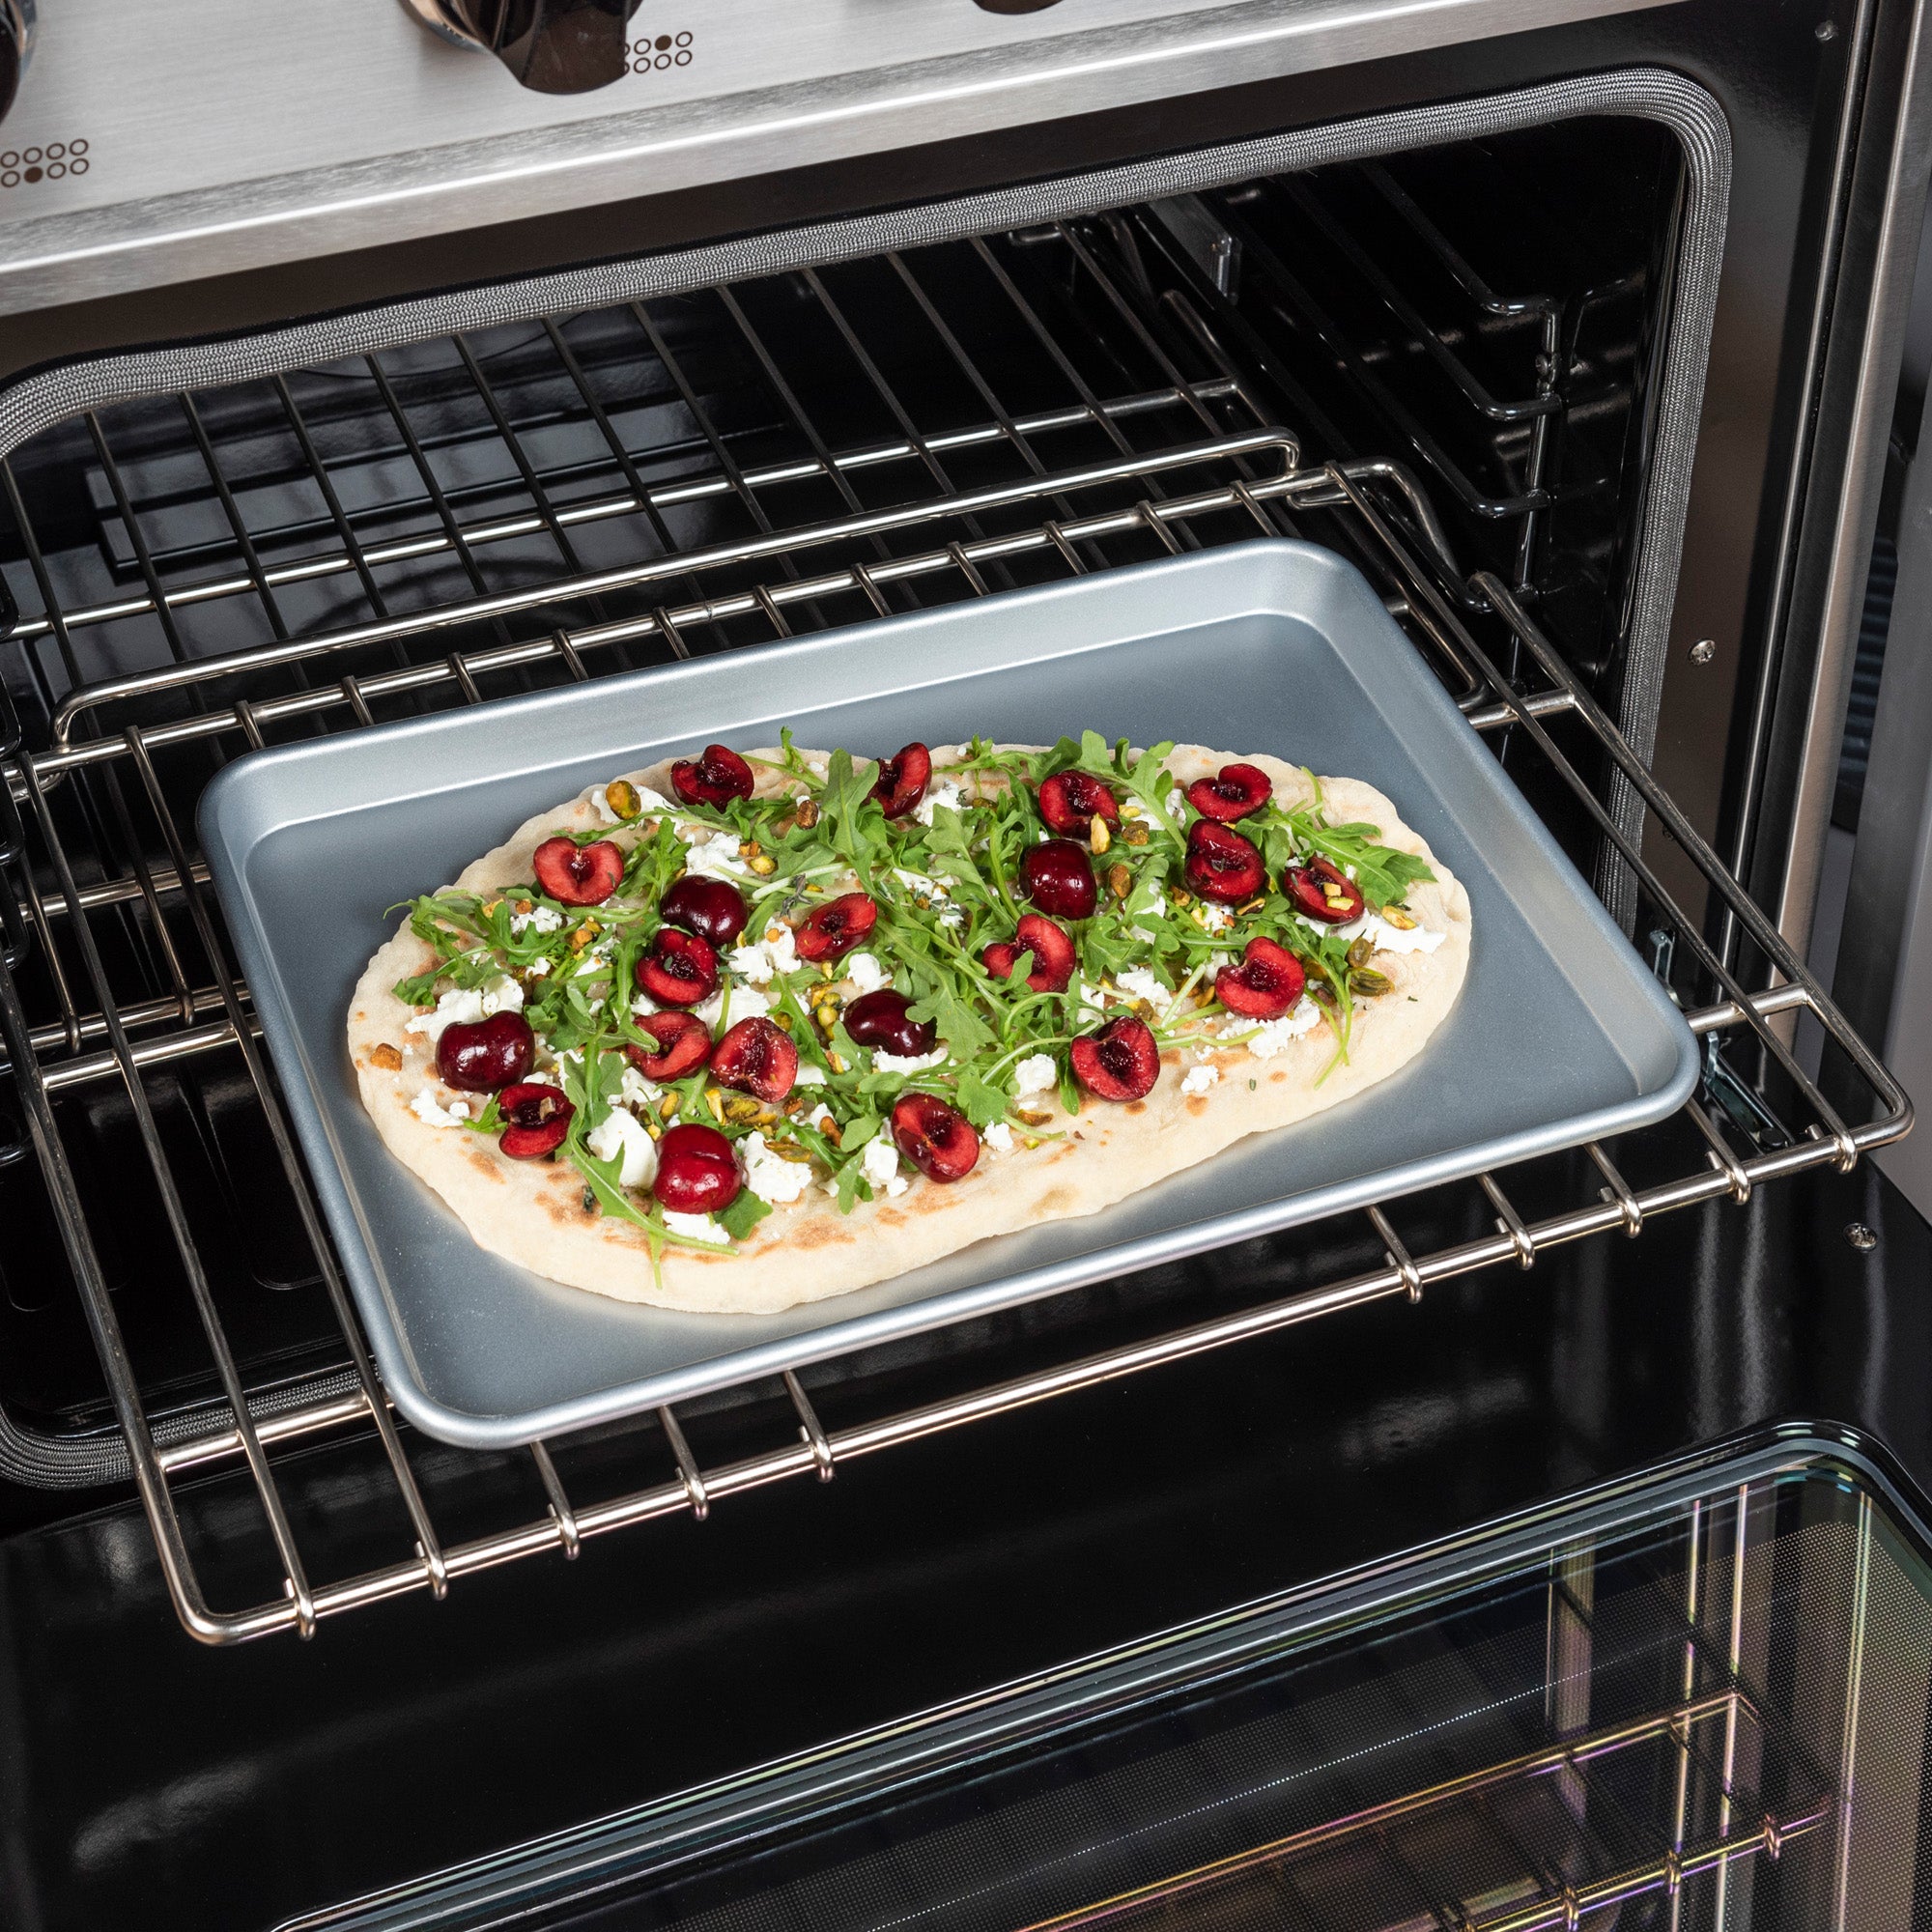 Oven Rack Guard - Be Made